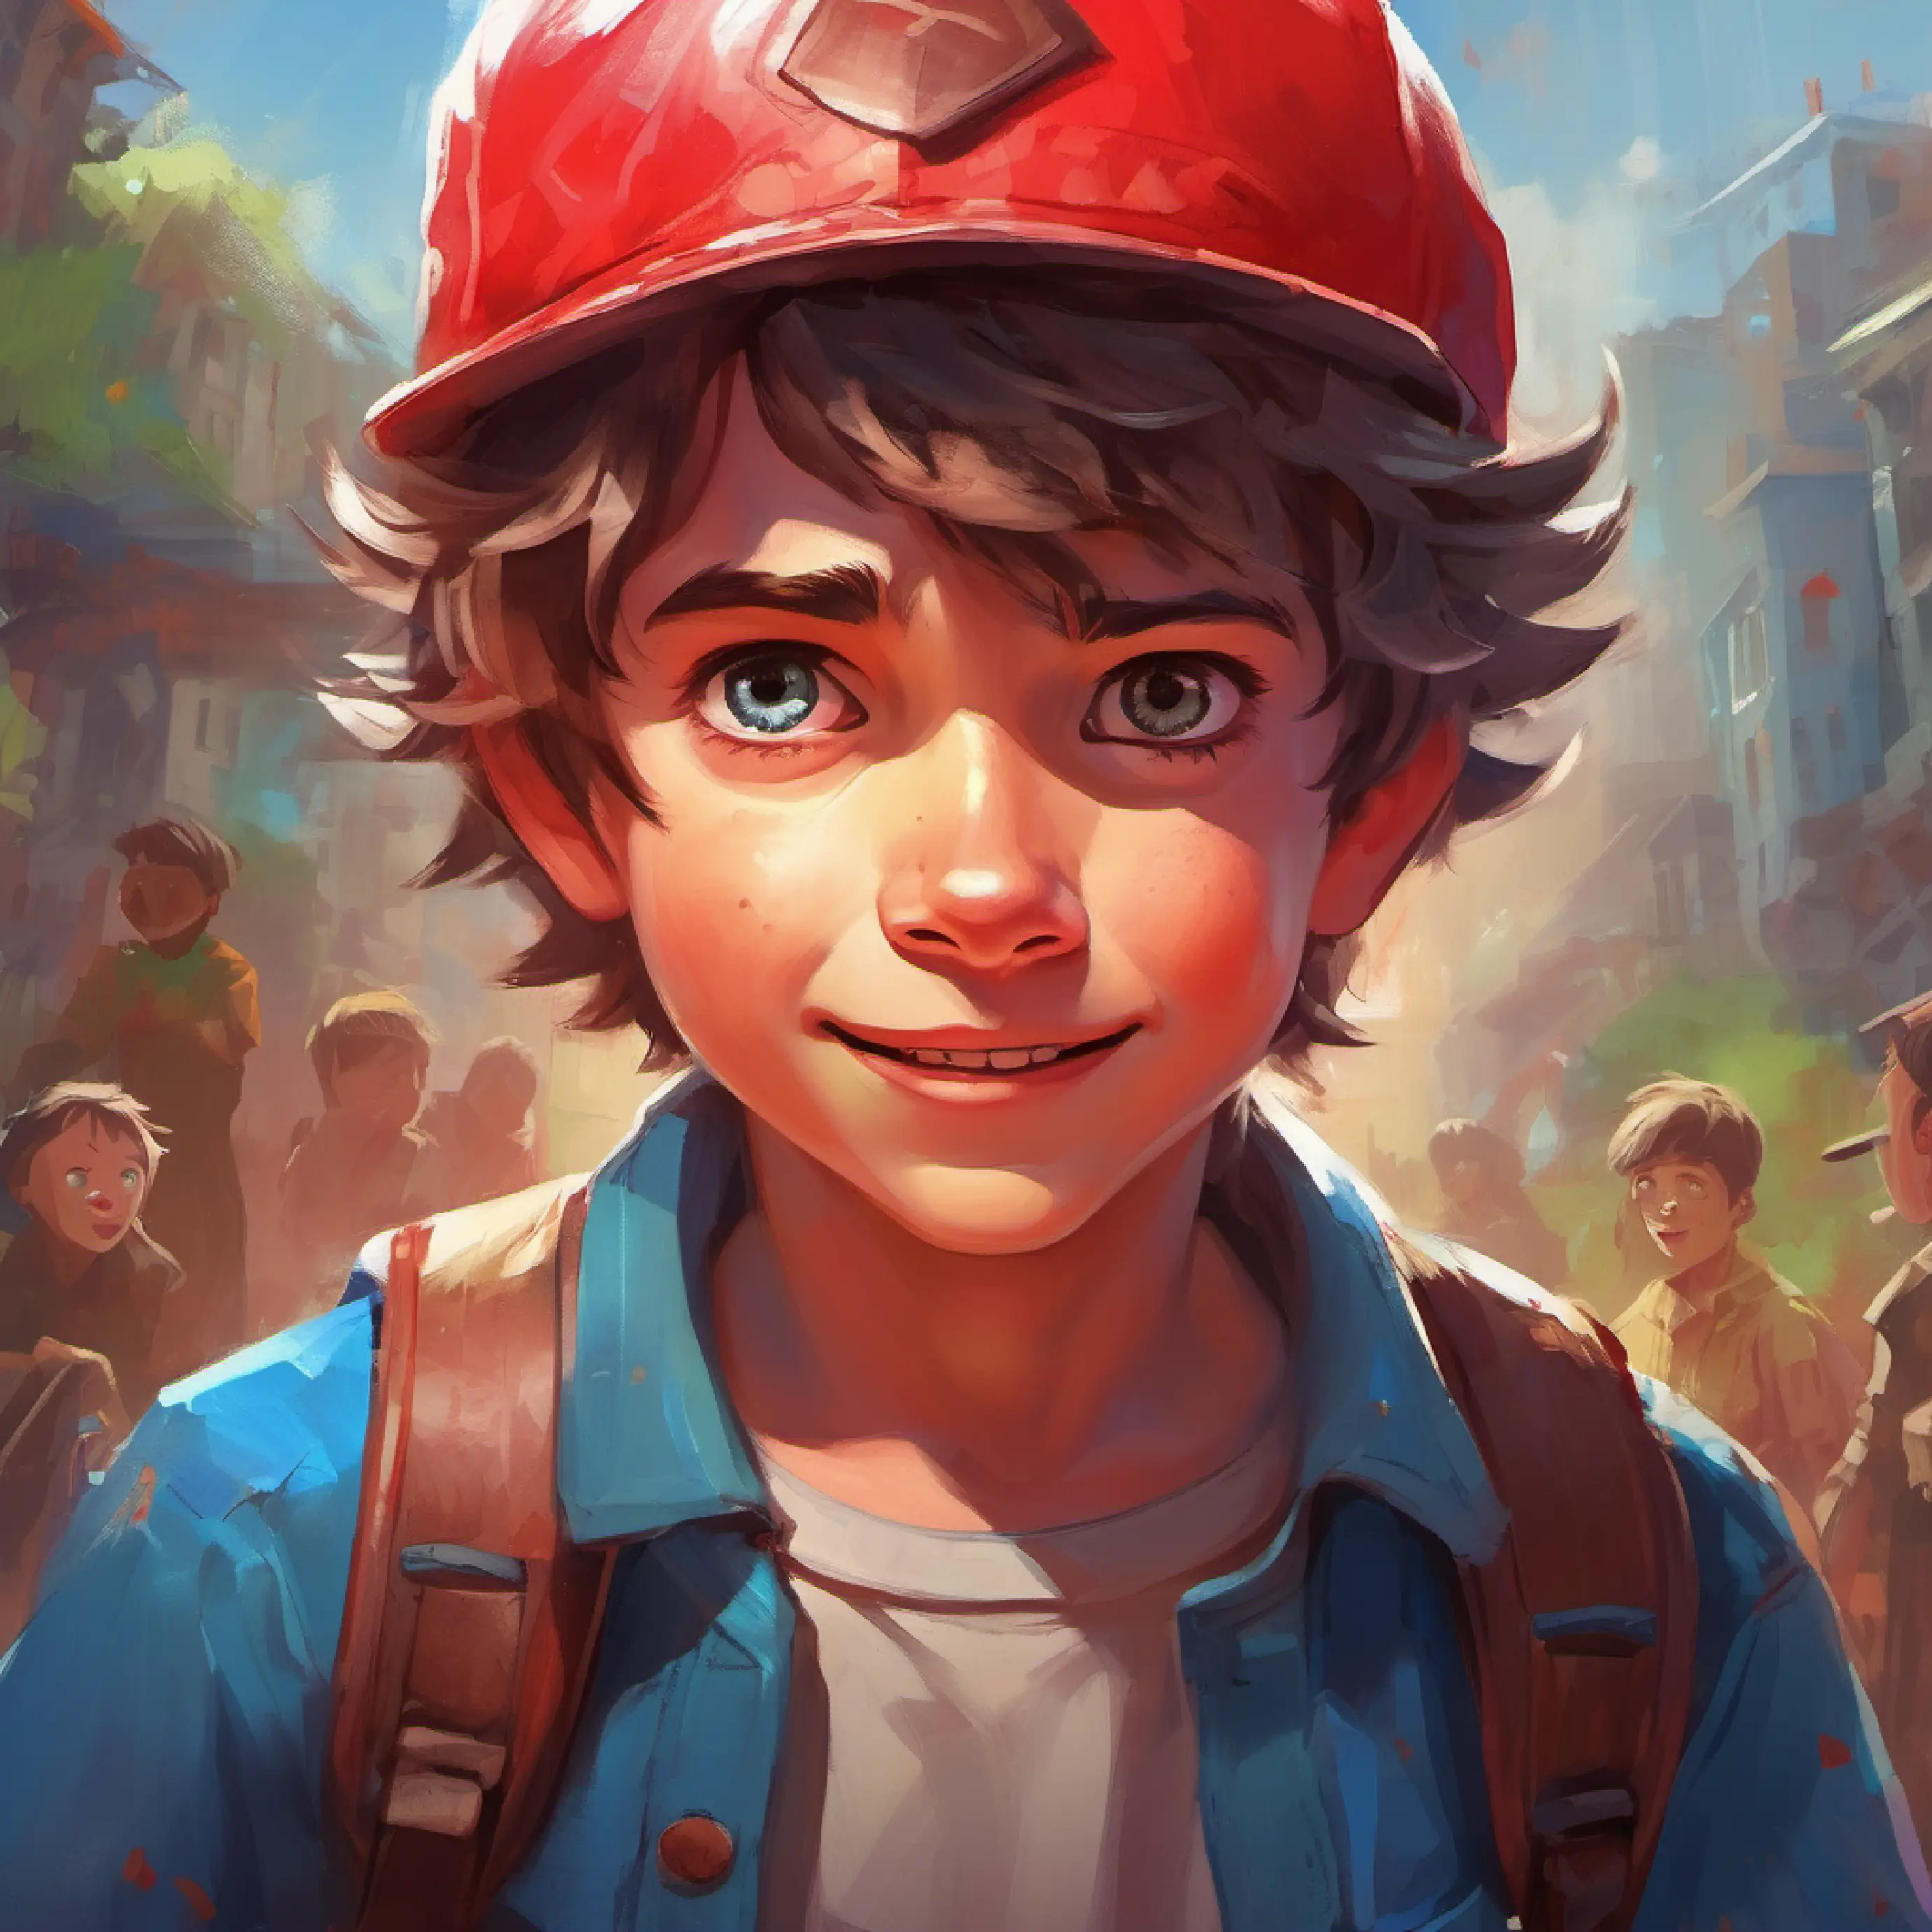 Boy with brave heart, wearing a red cap, curious eyes asks to join Zombie with a friendly smile, sparkling blue eyes, messy hair in her play-world.